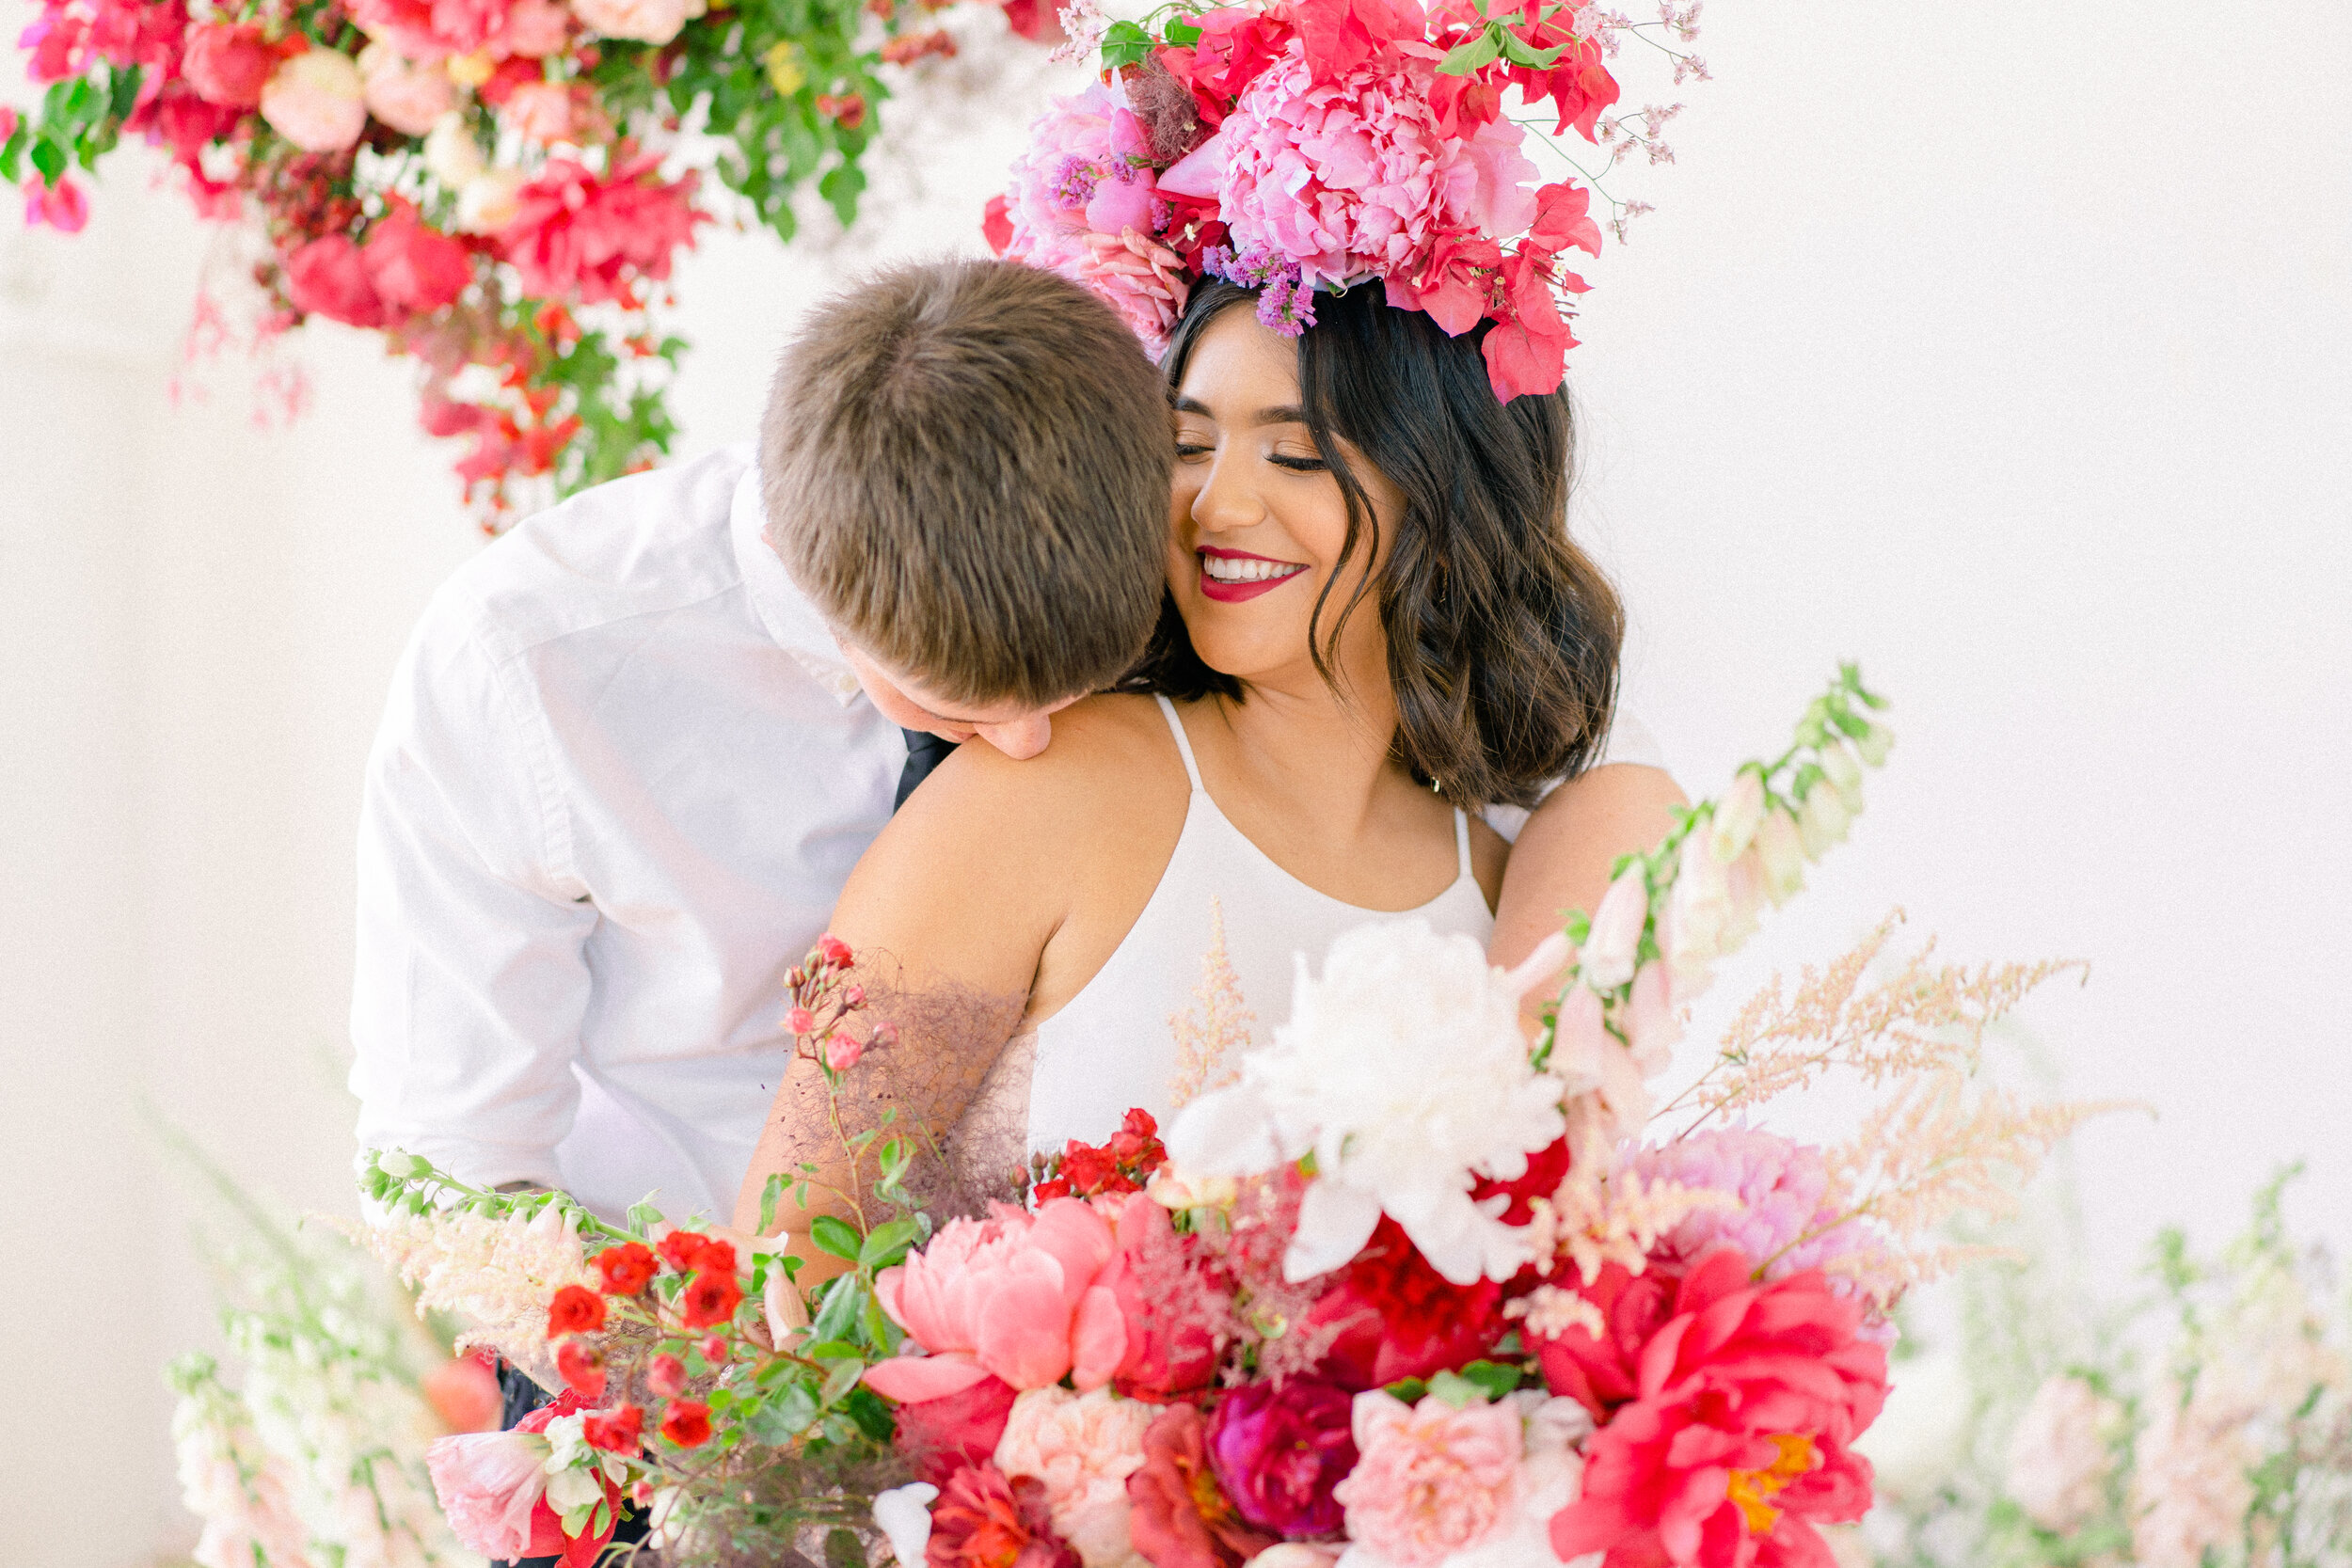 A Romantic Wedding Elopement Filled with Colorful Fuchsia - Sarahi Hadden Submission-88.jpg